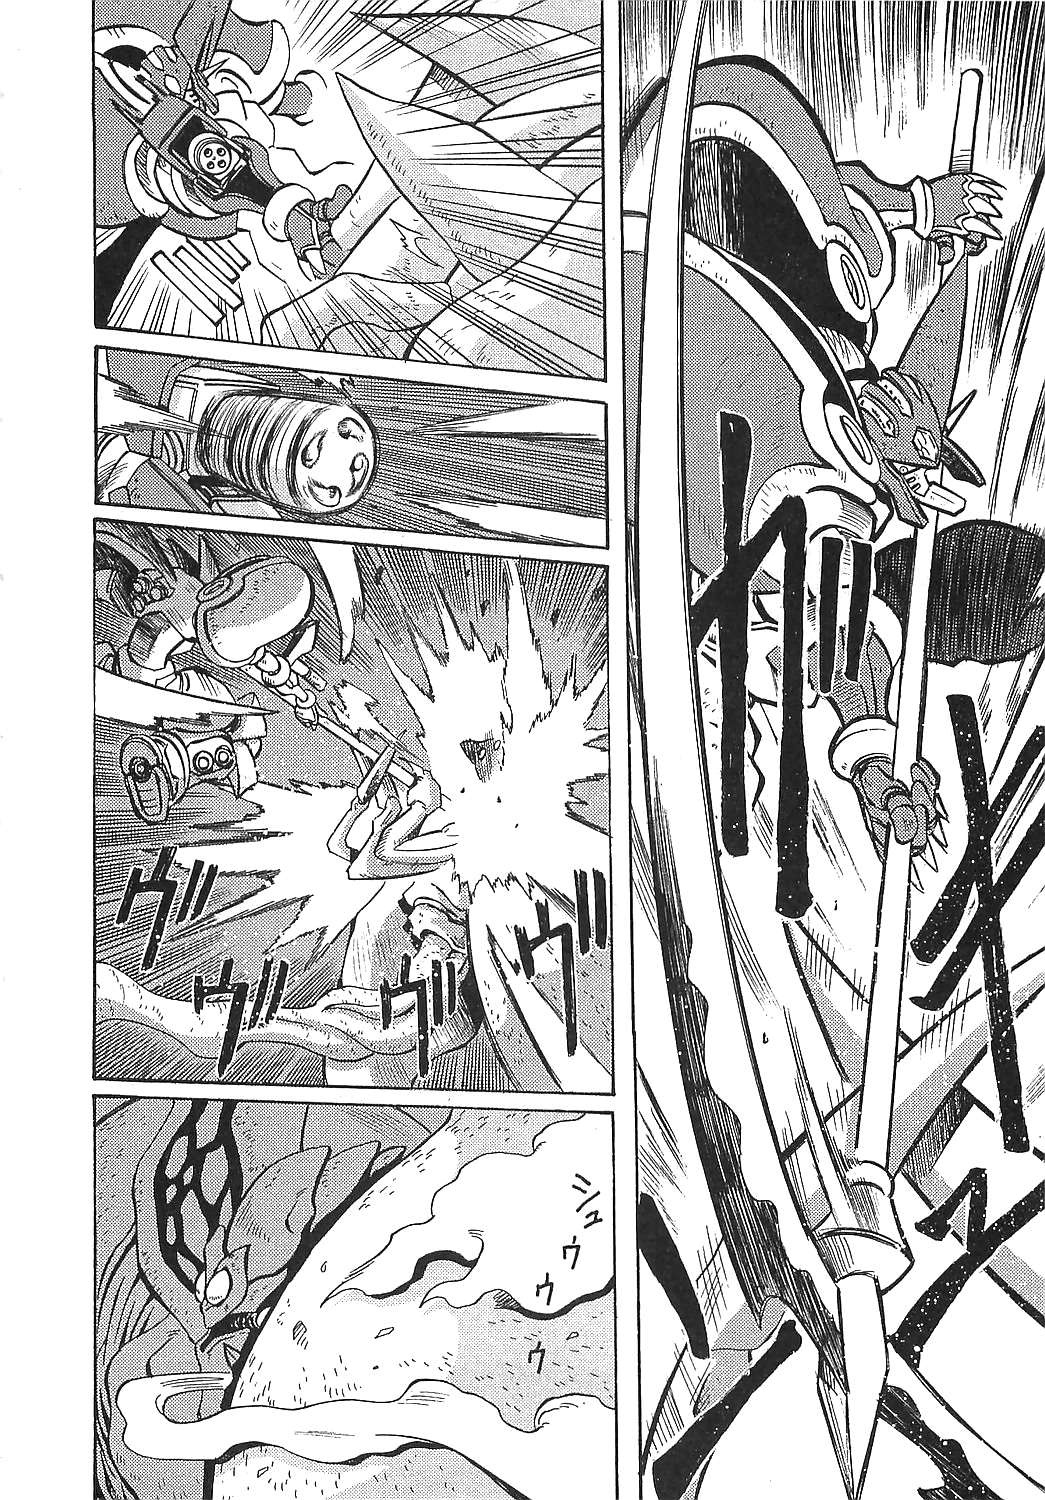 Getter Robo Hien - The Earth Suicide Vol.3 Chapter 14: The Awakening of Getter Gaia